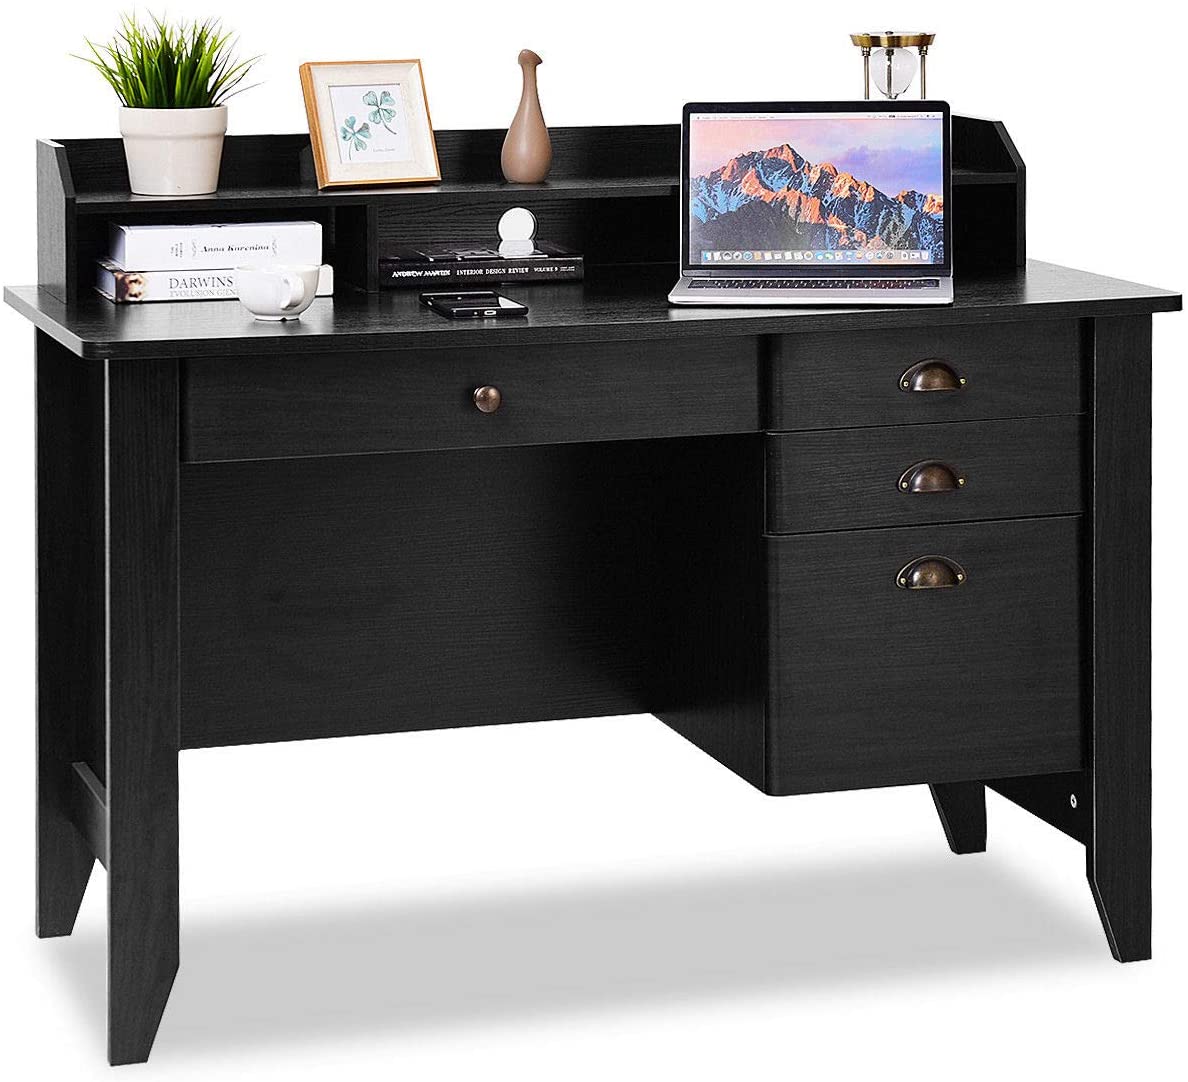 Tangkula Computer Desk, Home Office Desk, Wood Frame Vintage Style Student Table with 4 Drawers & Bookshelf, PC Laptop Notebook Desk, Spacious Workstation Writing Study Table (Black)